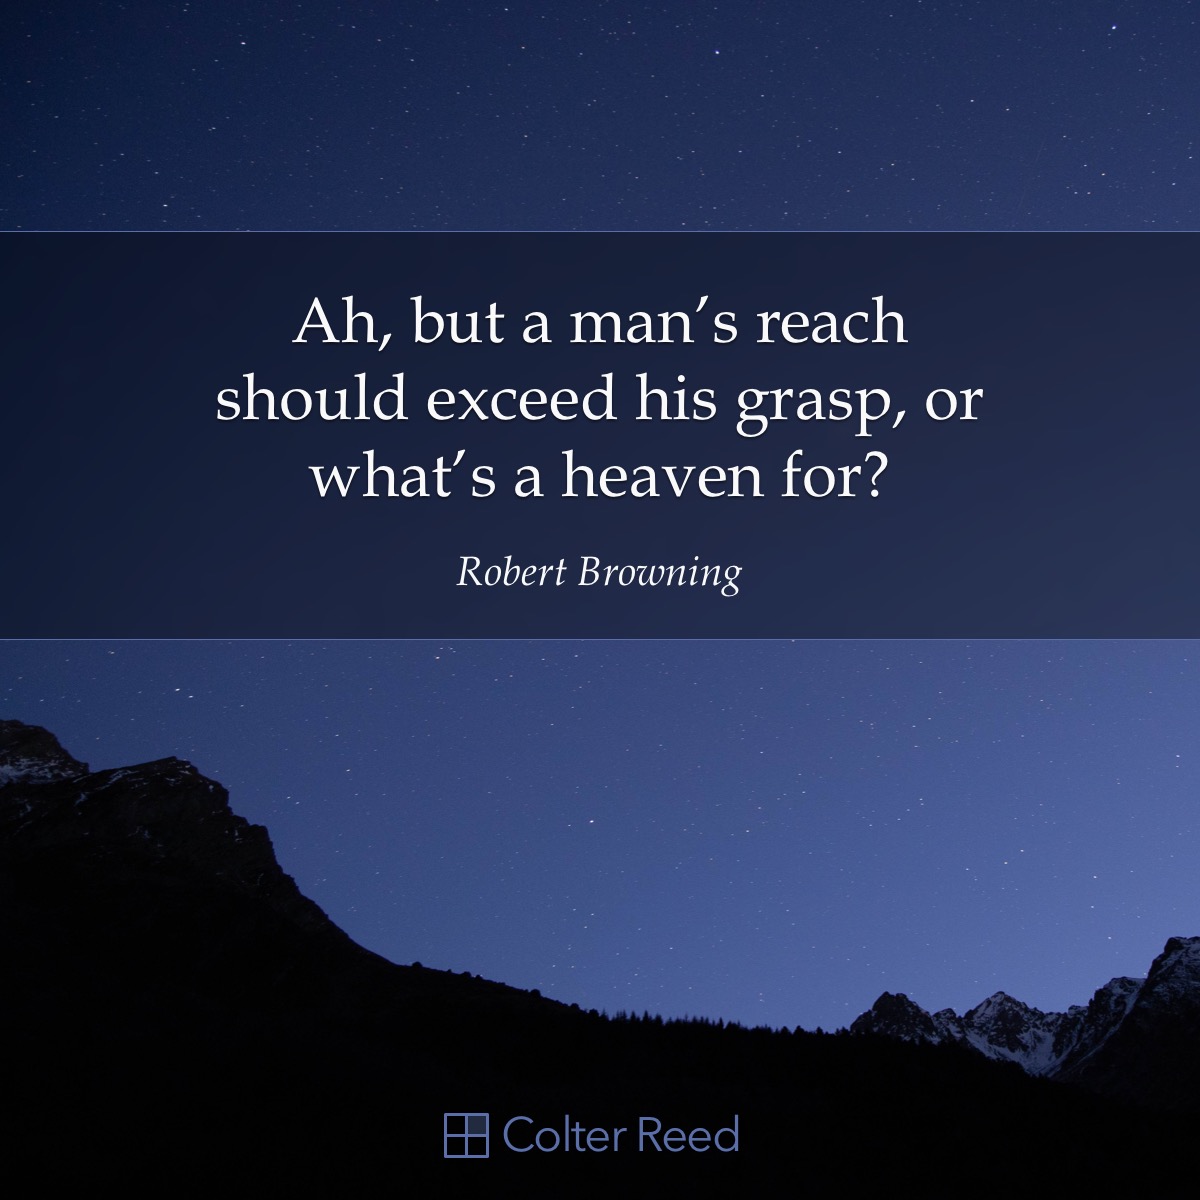 Ah, but a man’s reach should exceed his grasp, or what’s a heaven for? —Robert Browning